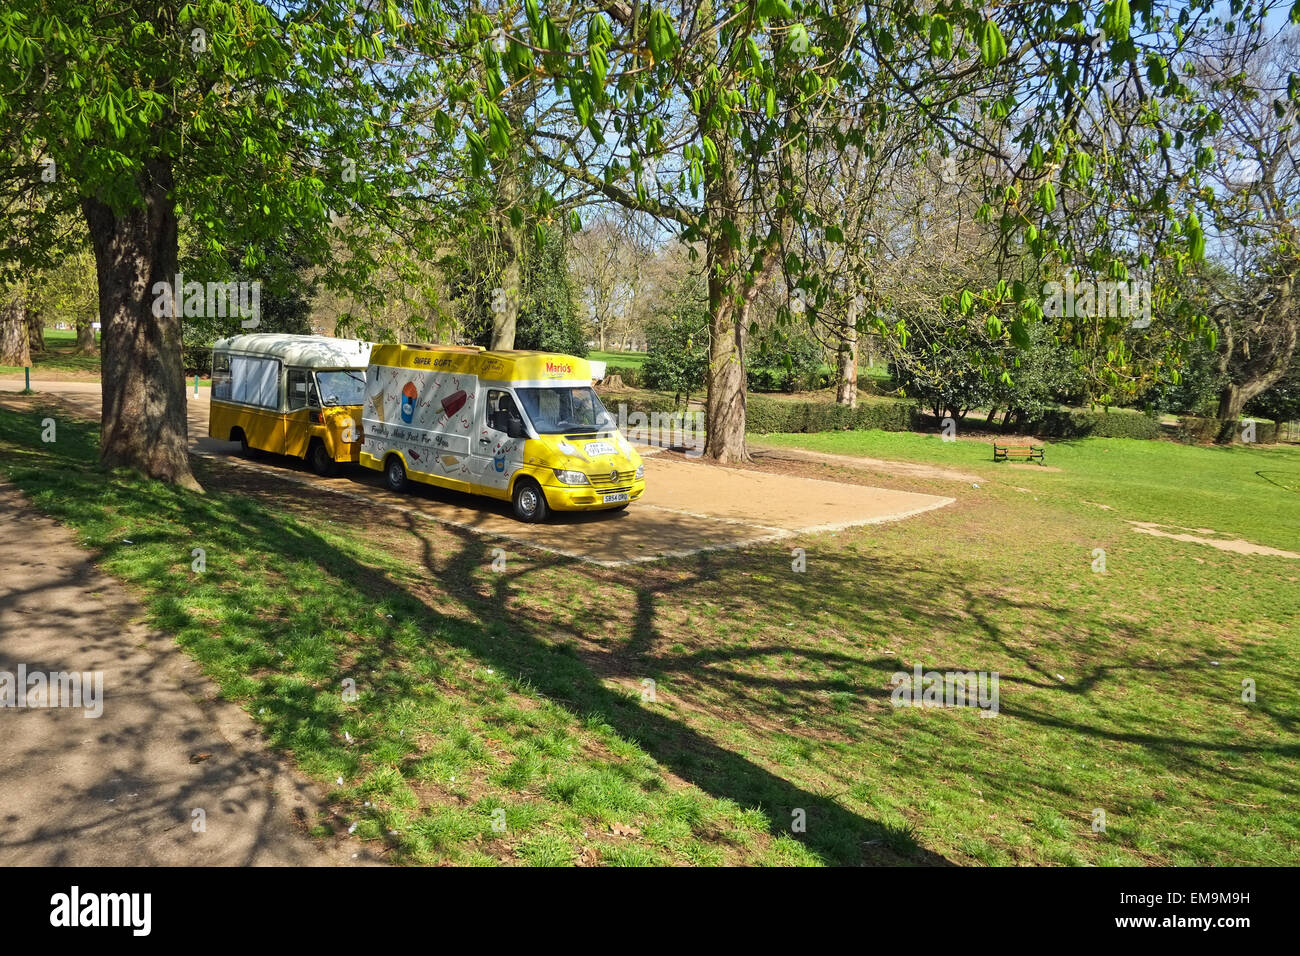 Ice cream vans with no customers in Public park Stock Photo